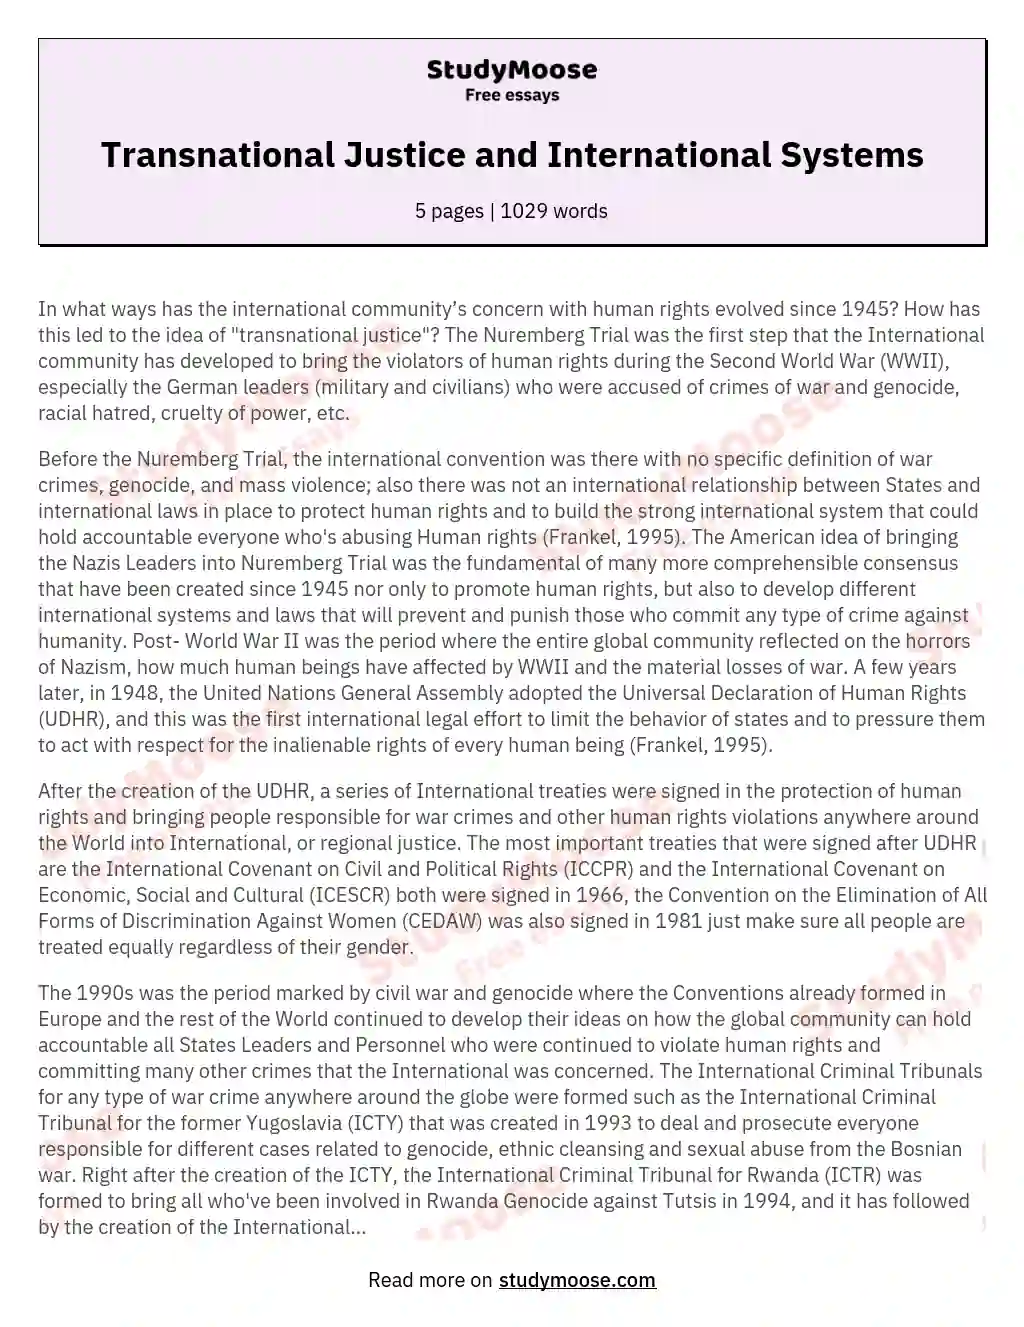 Transnational Justice and International Systems essay